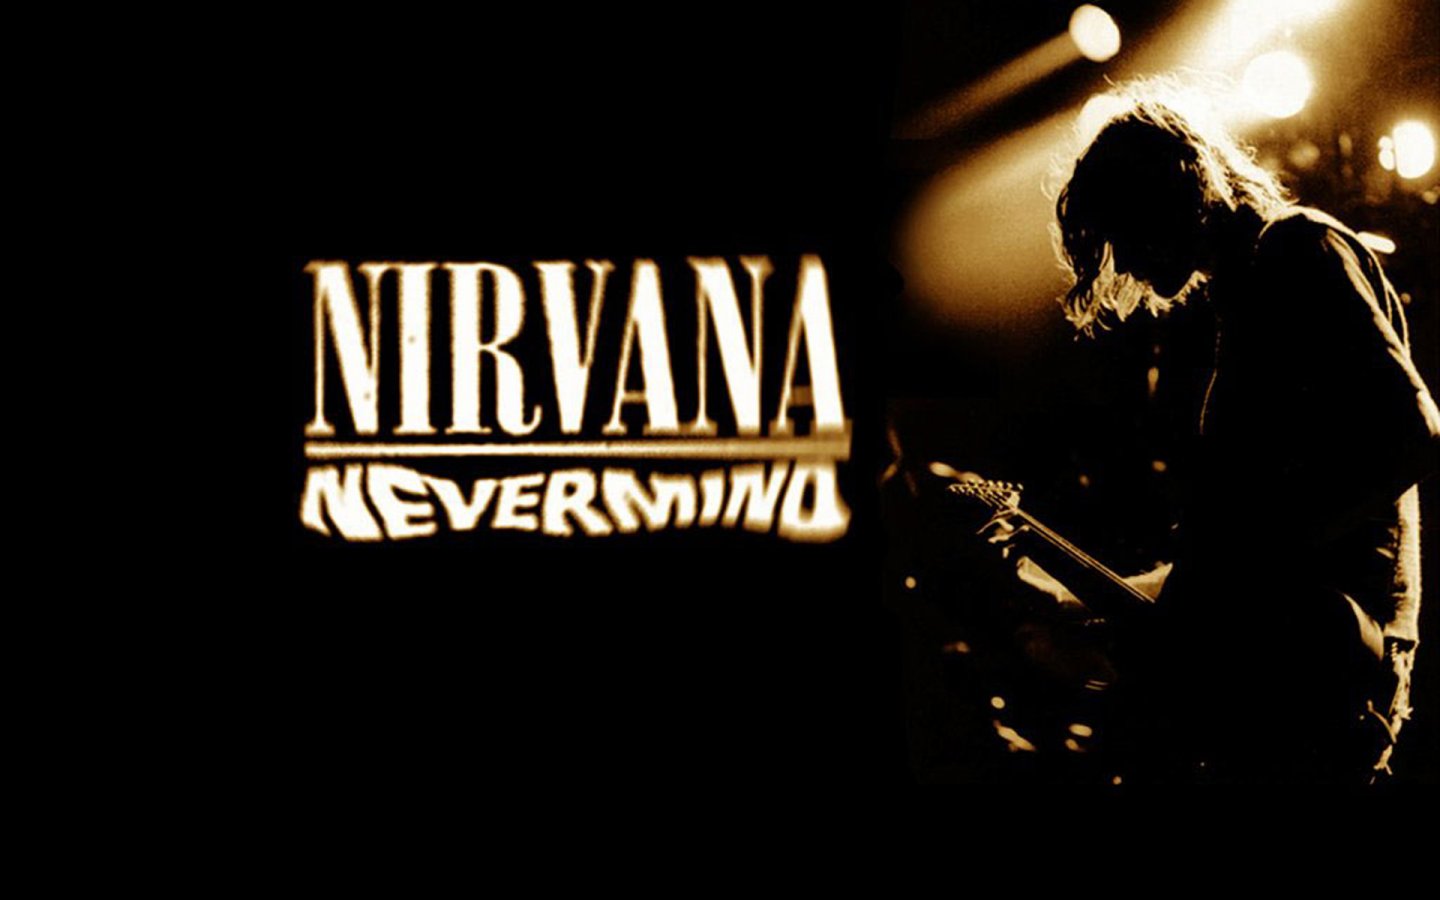 NIRVANA Wallpaper 1440x900 Wallpapers 1440x900 Wallpapers Pictures